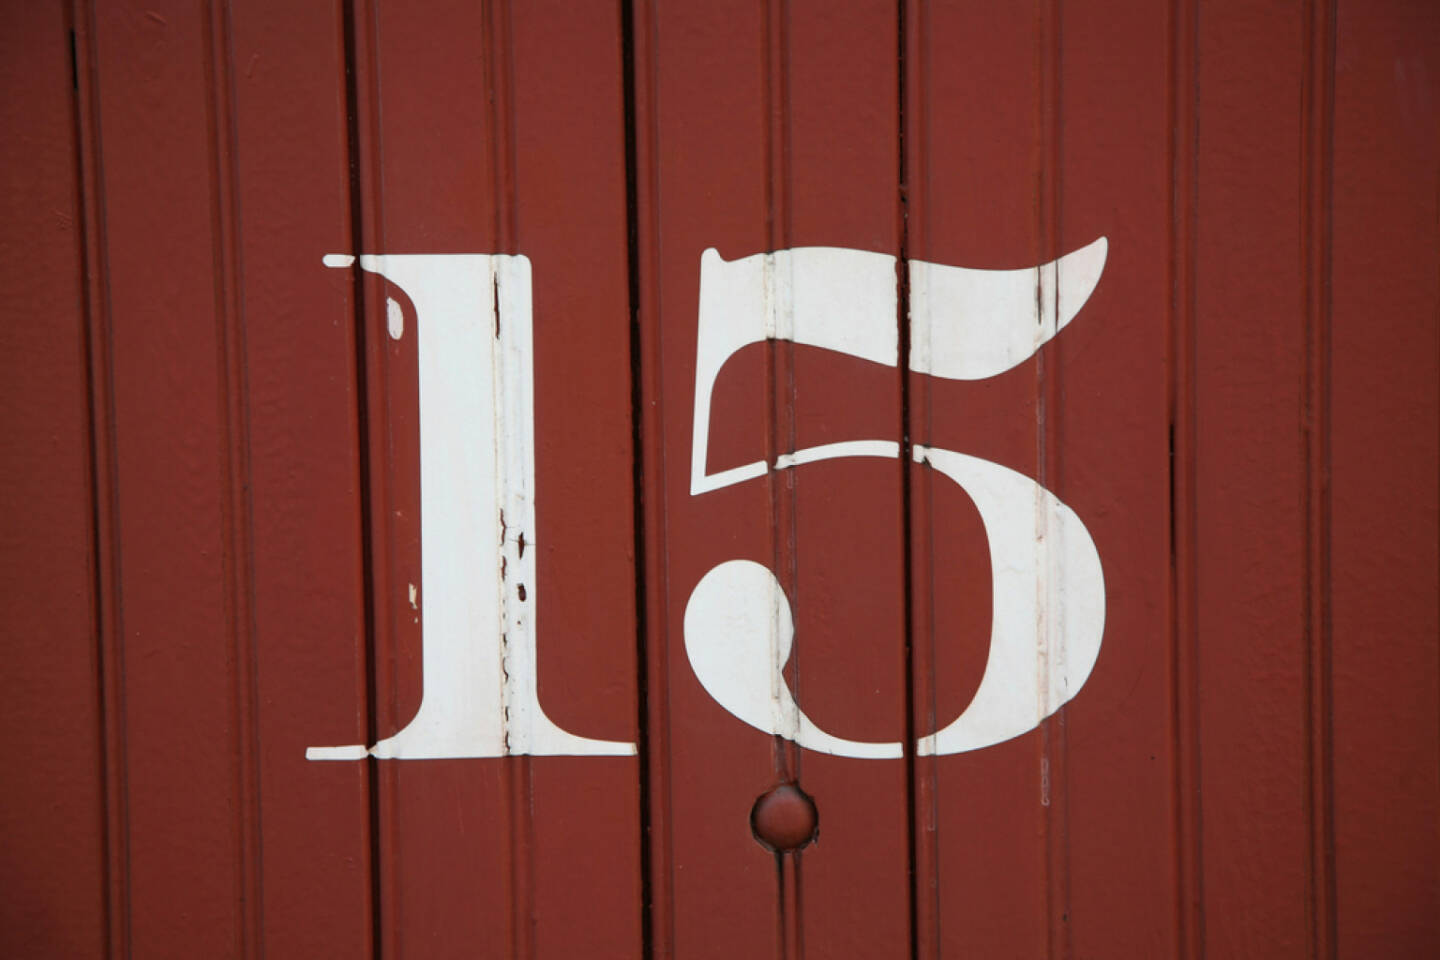 15, fünfzehn, Zahl, http://www.shutterstock.com/de/pic-129167567/stock-photo-numbers-painted-on-the-sides-of-old-railway-boxcars-from-the-early-to-mid-s.html